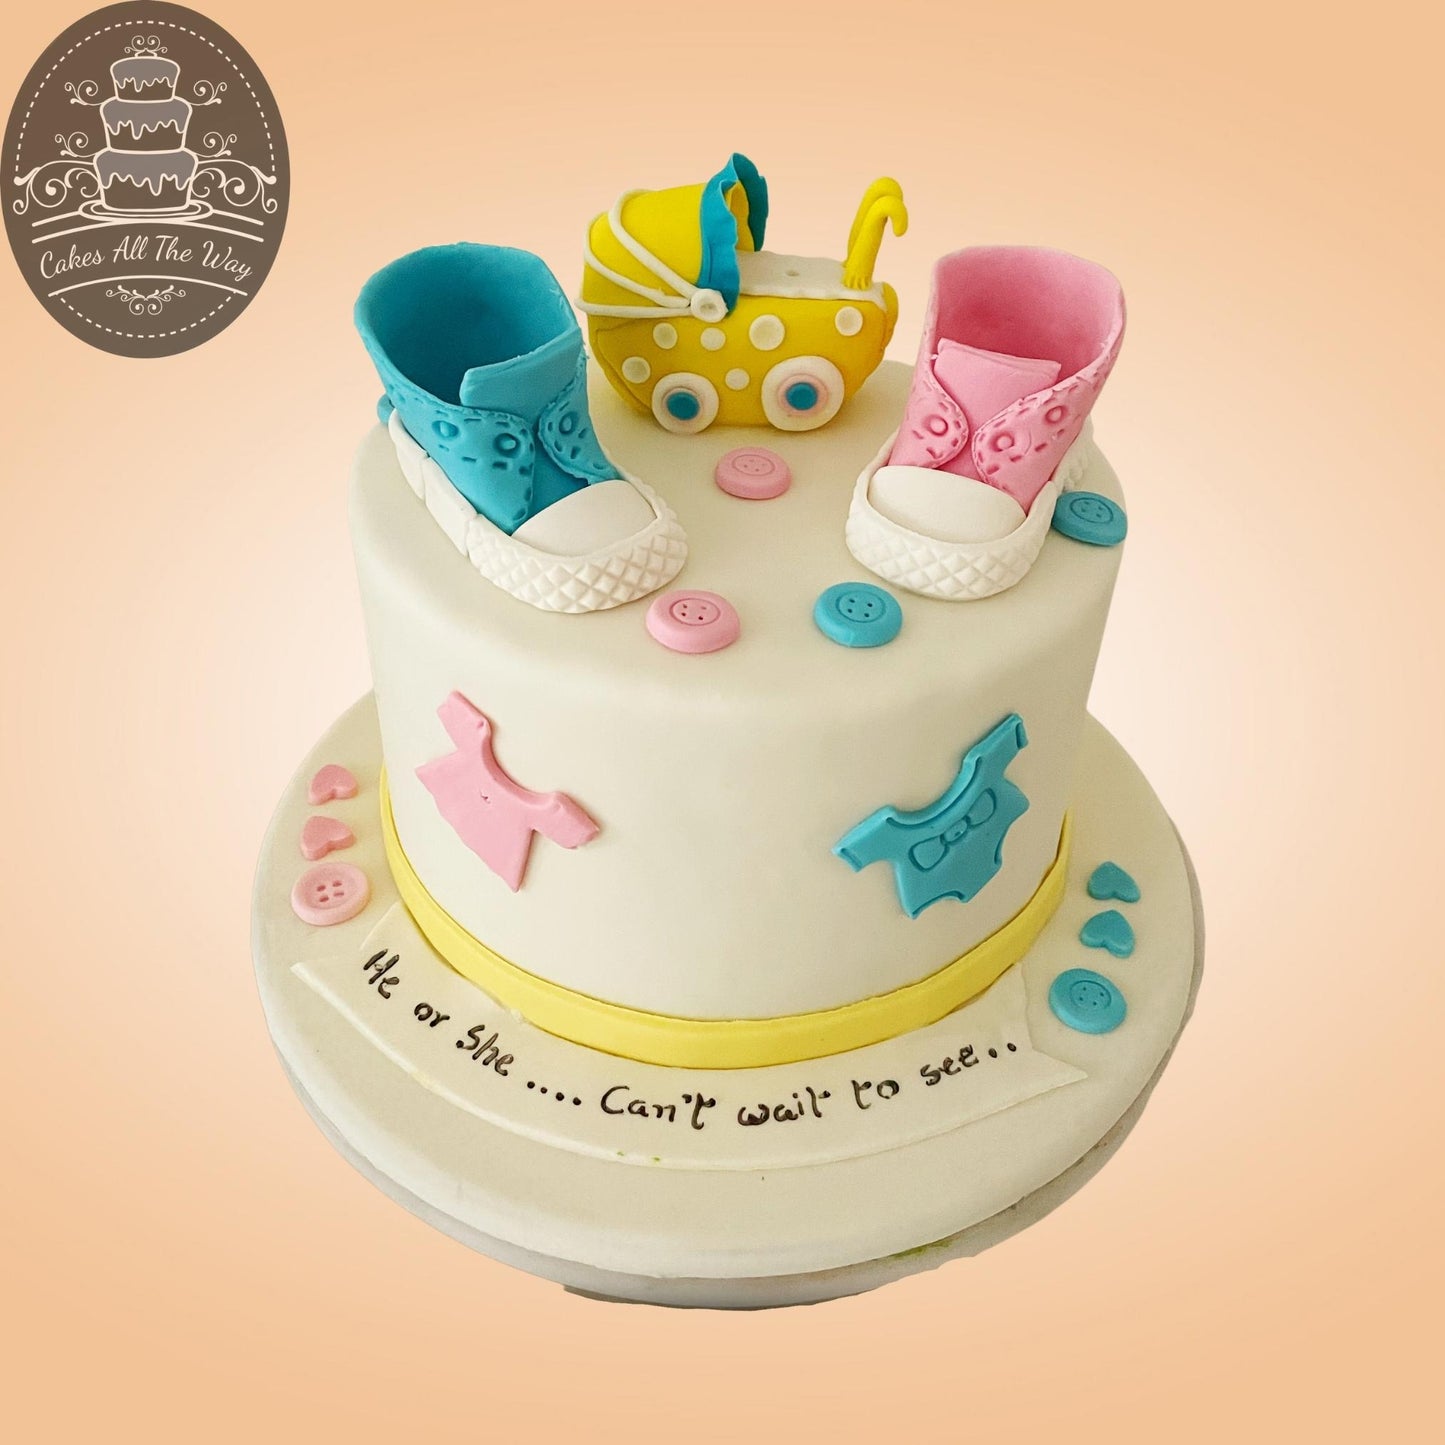 Shoes and Cradle Baby Shower Theme Cake